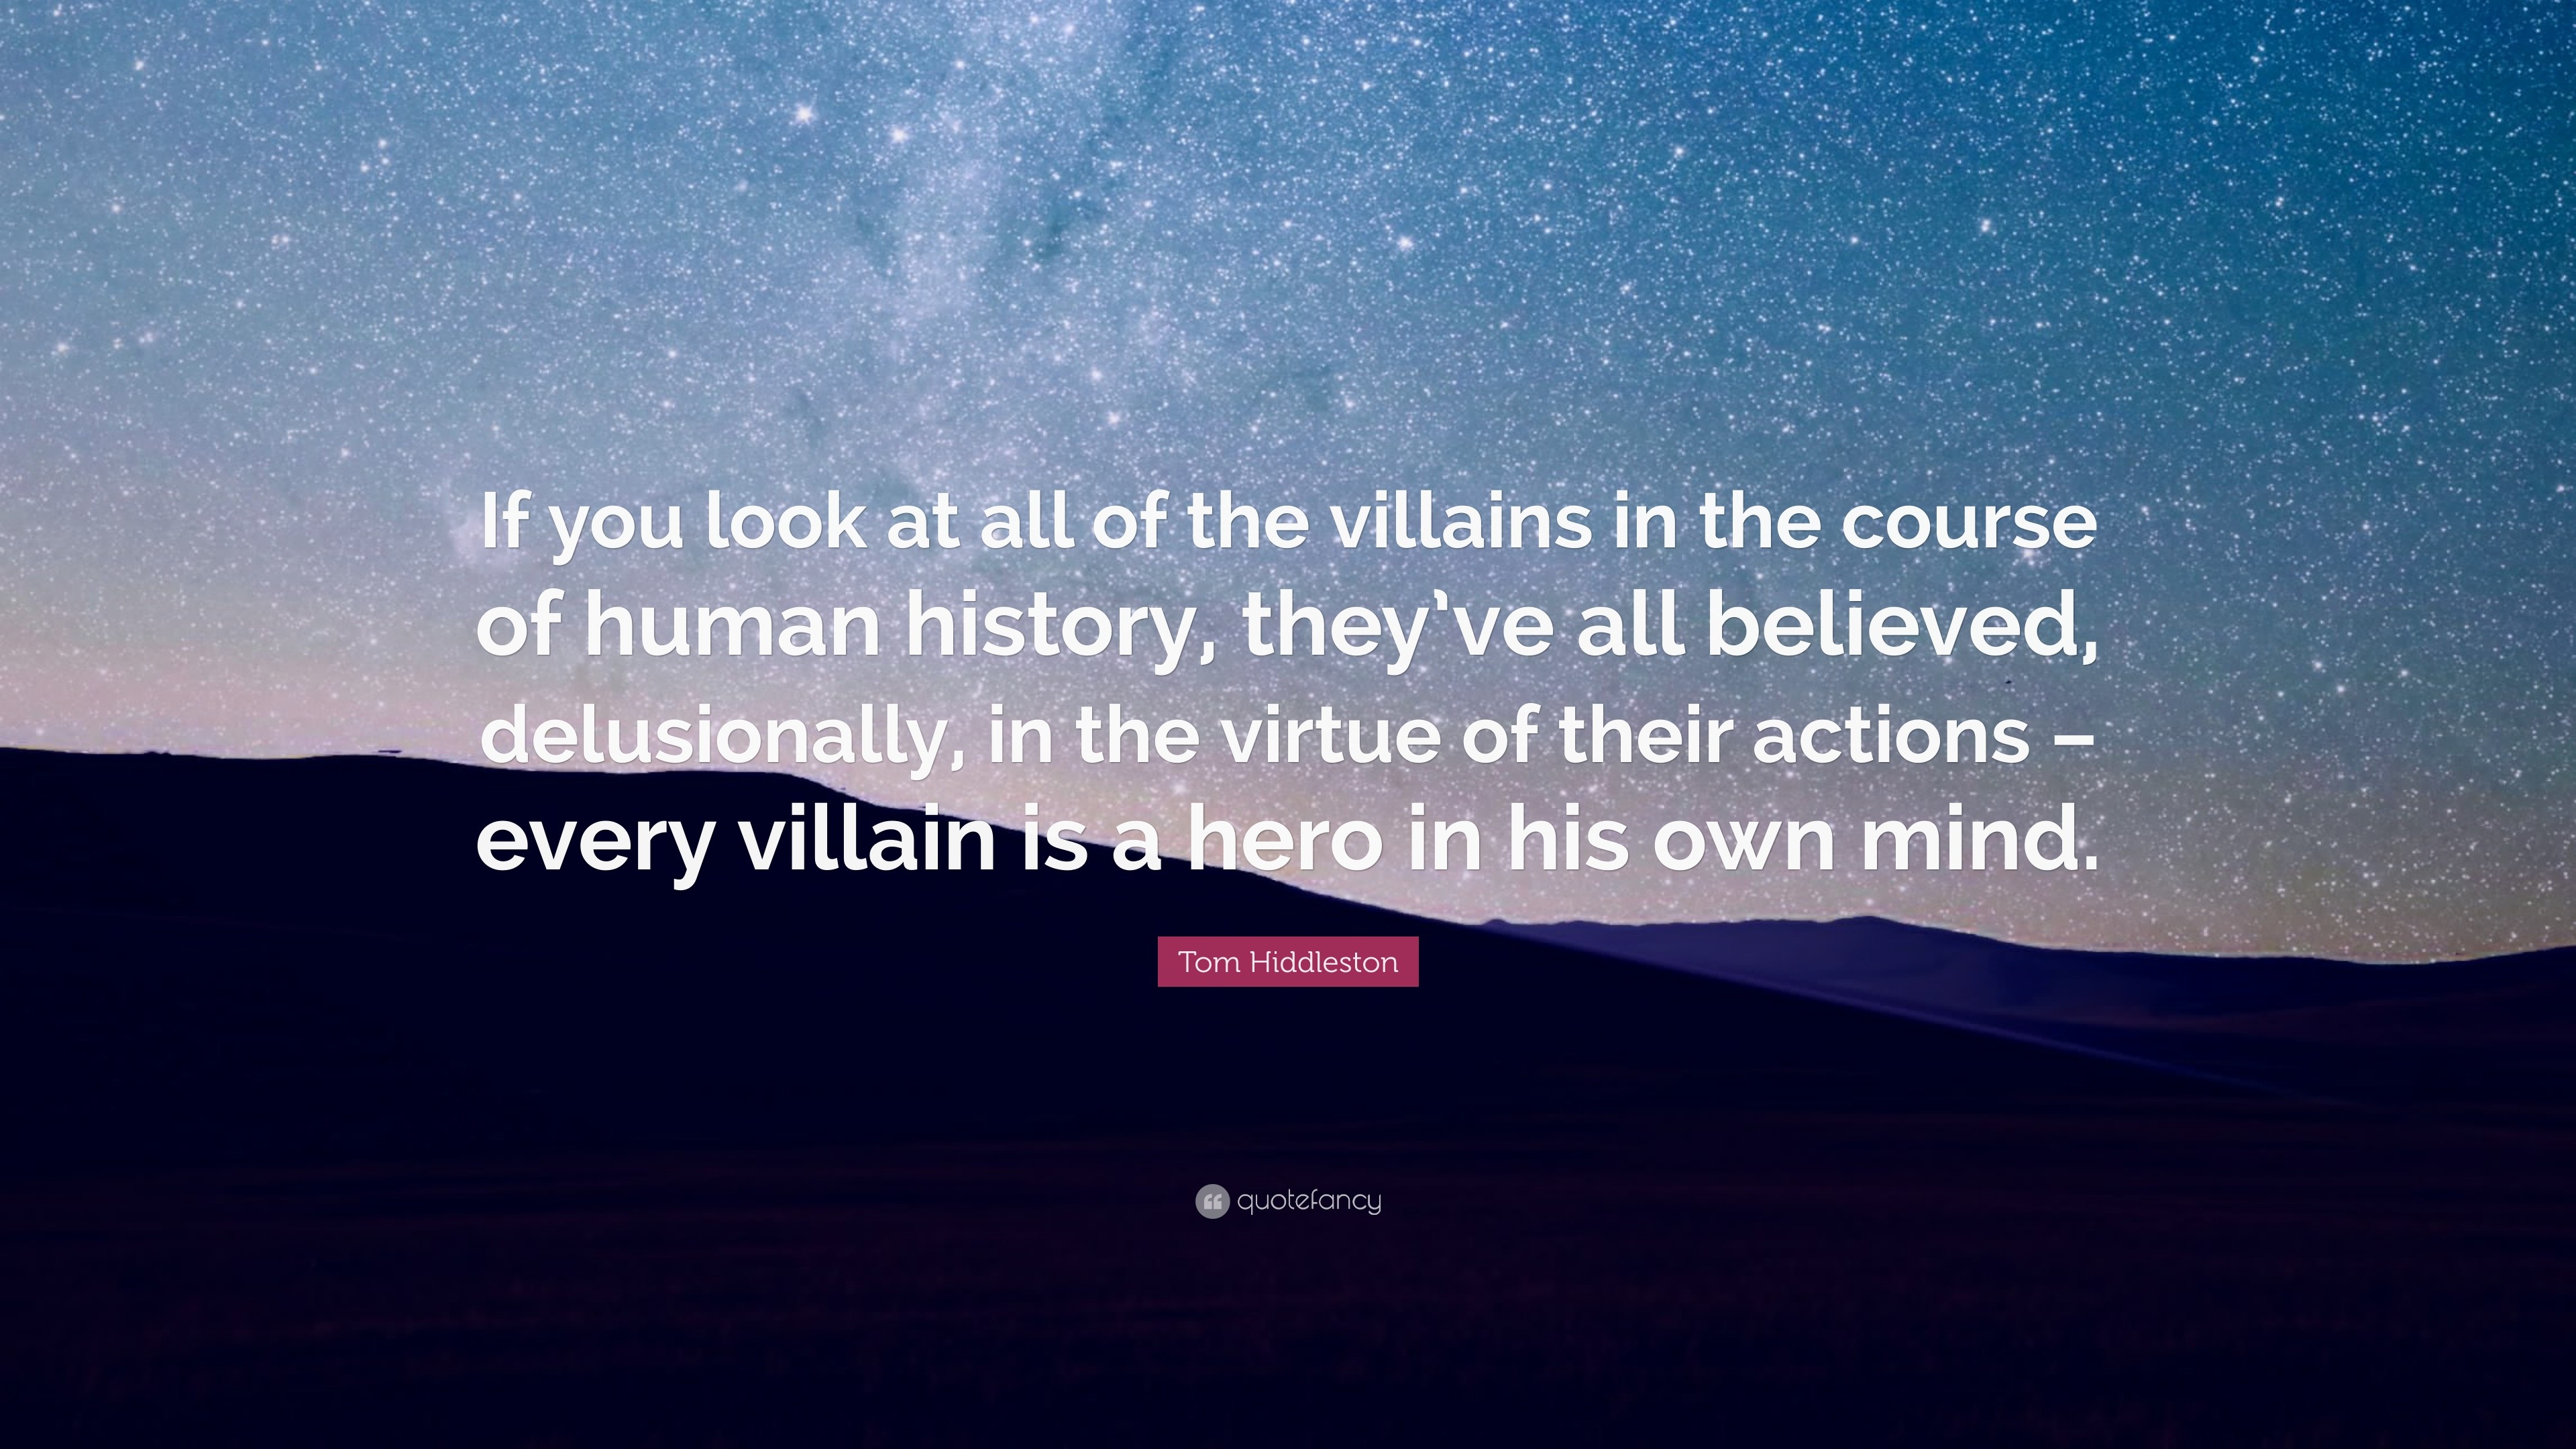 Tom Hiddleston Quote: “If you look at all of the villains in the course ...